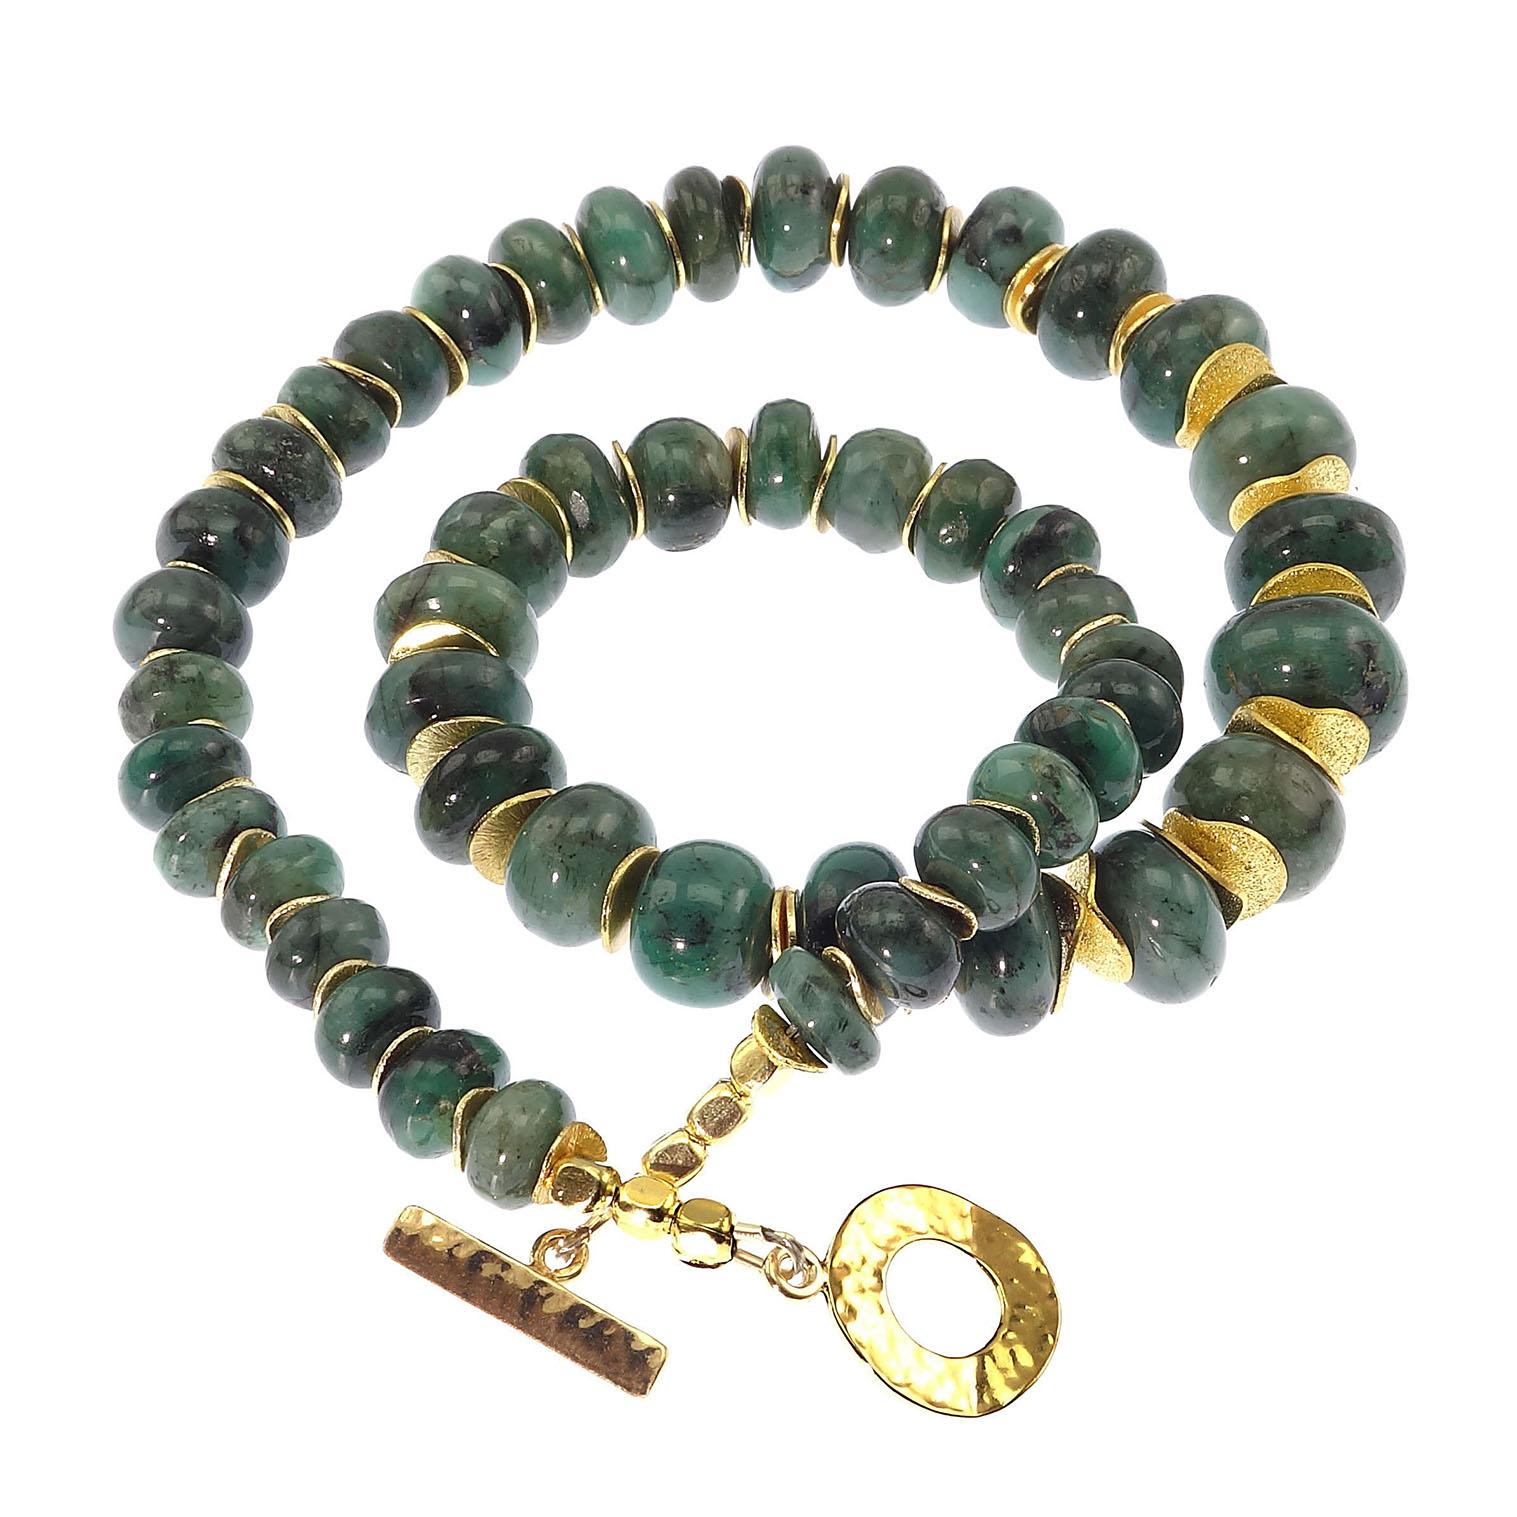  Necklace of Highly Polished Graduated  Green Emerald Rondels with Gold Accents 6